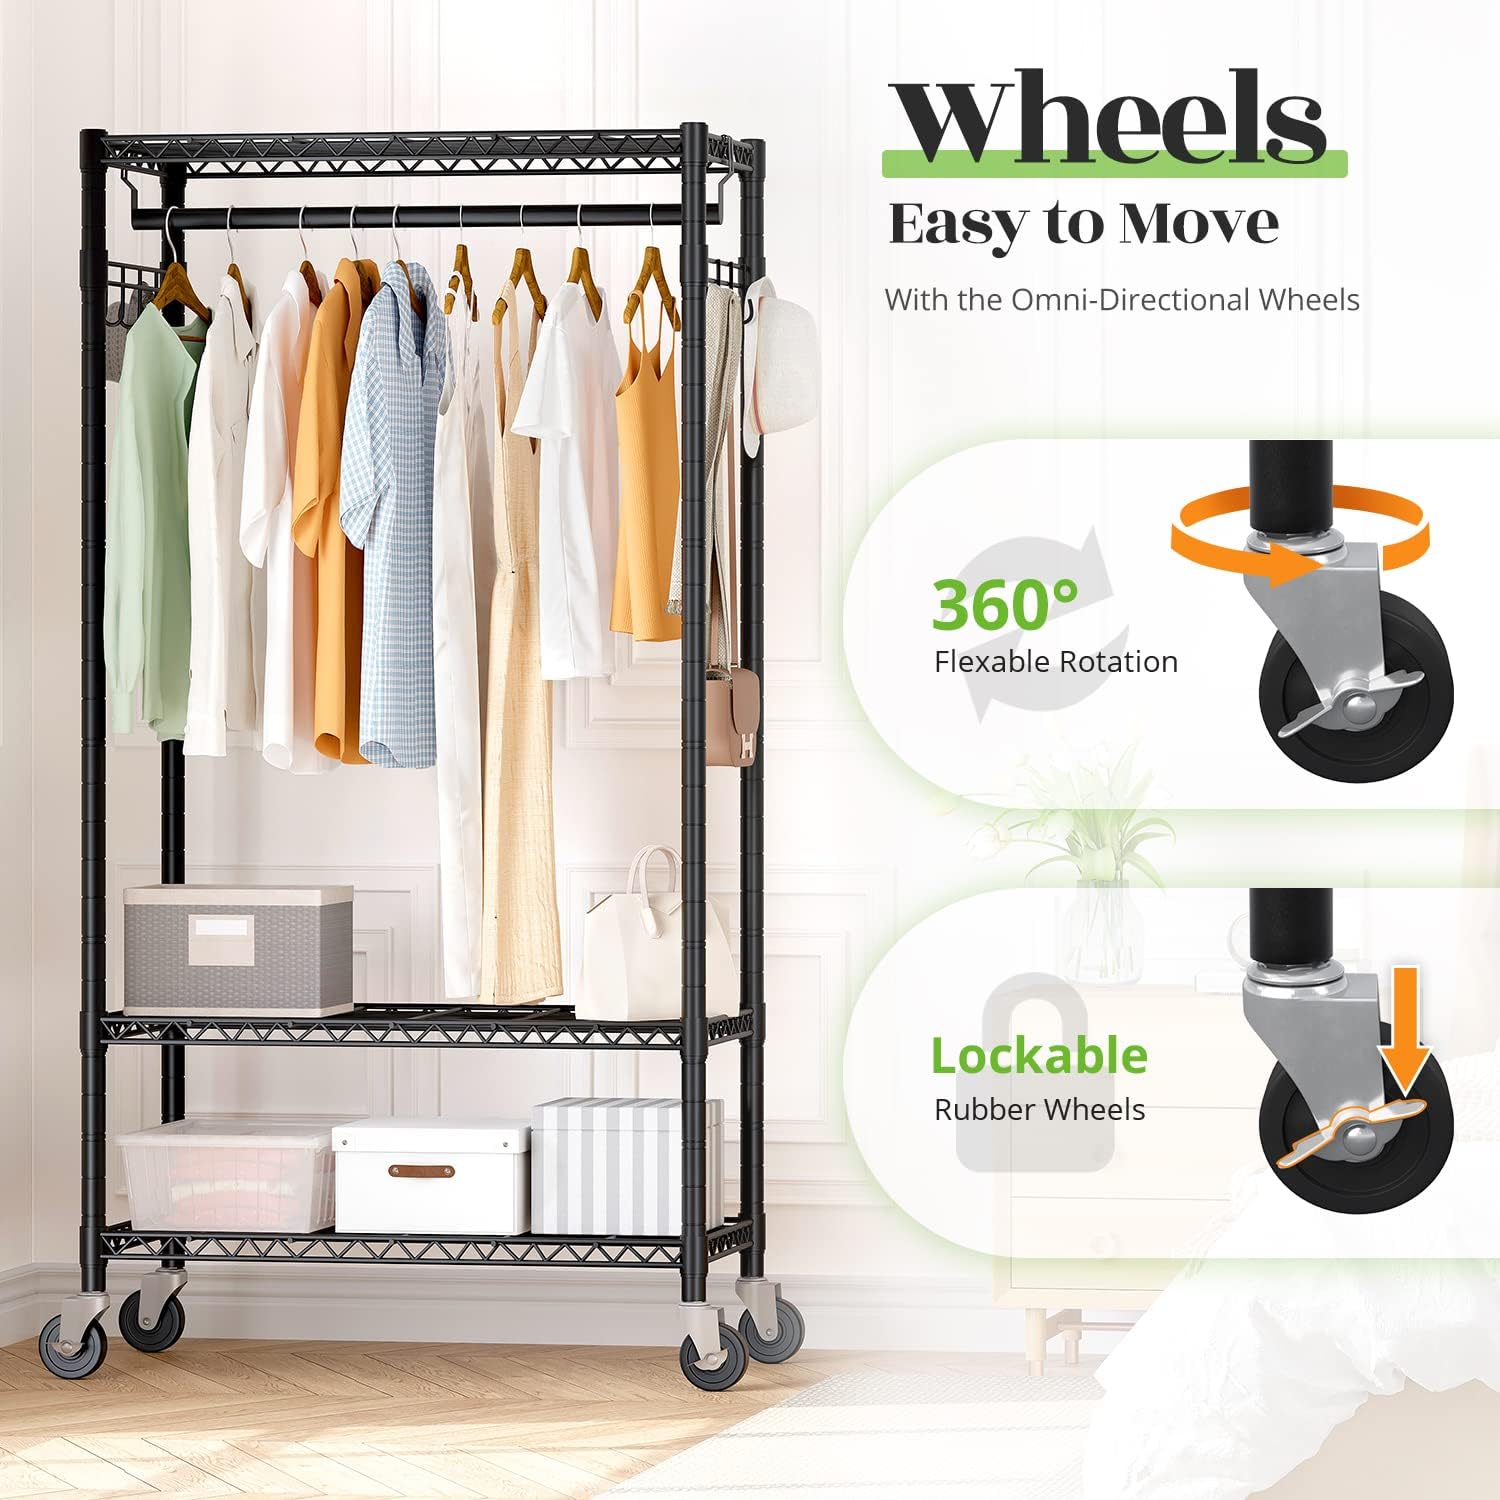 Heavy Duty Rolling Wire Garment Rack Clothes Rack with Wheels and Hooks, Adjustable Clothing Rack with 4 Tier Shelves, Portable Freestanding Closet Rack for Hanging Clothes, Max Load 725LBS